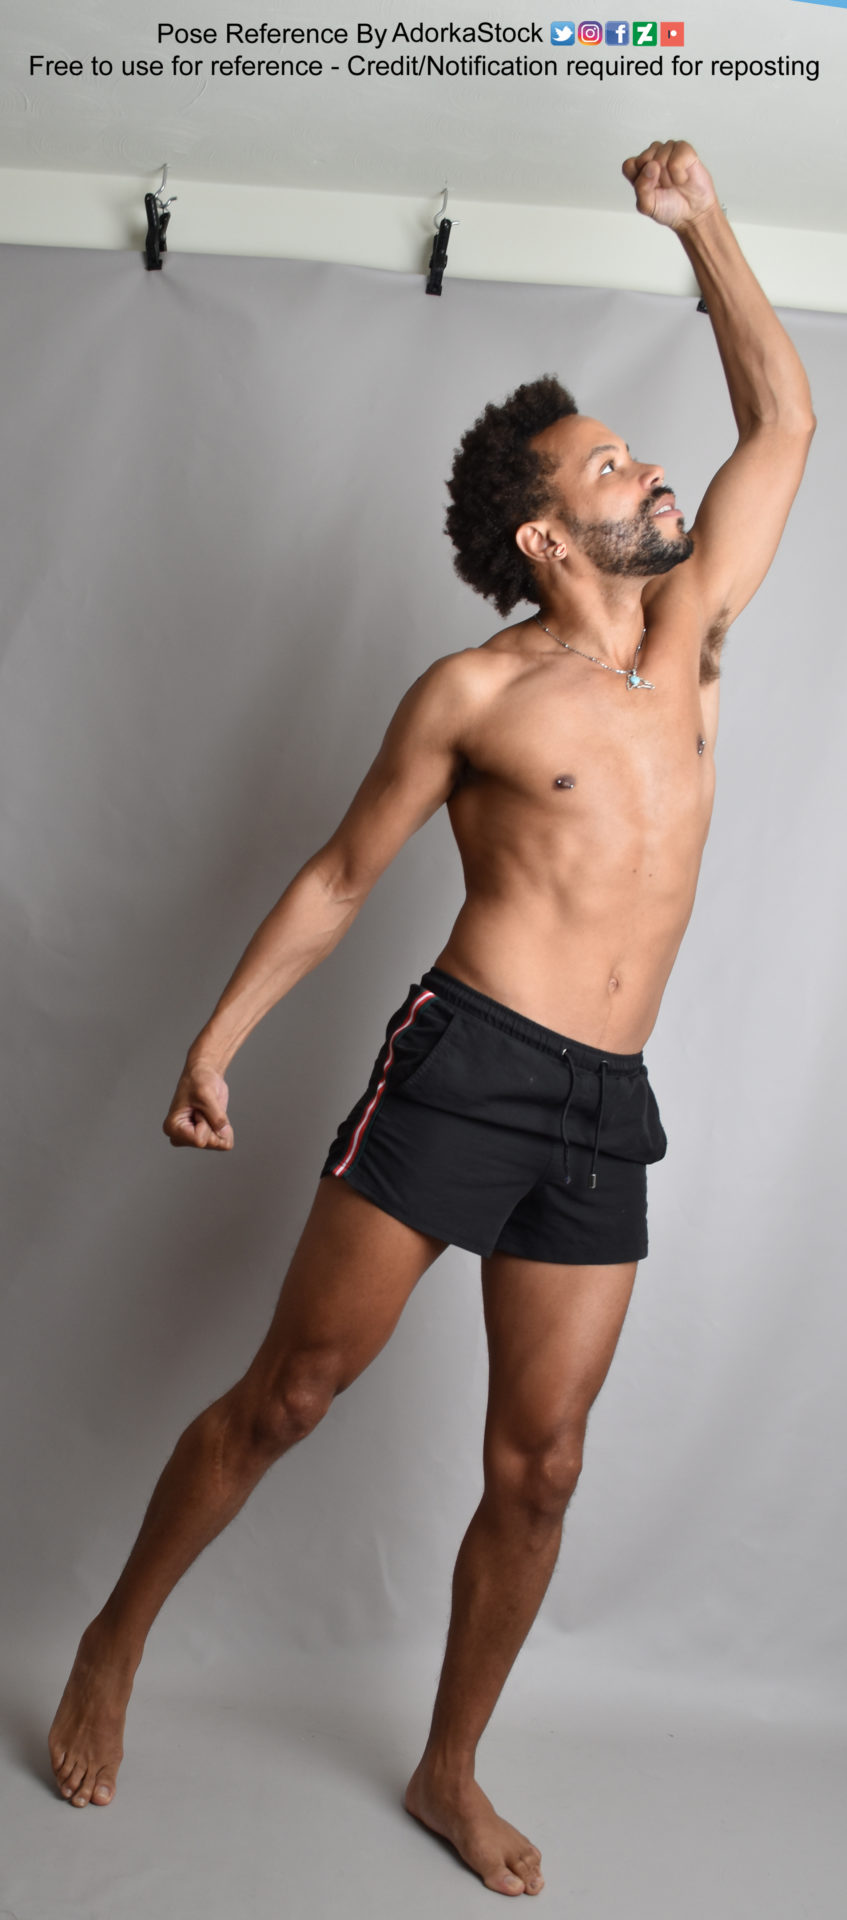 Thin, Latino, male pose reference reaching up with a fist over his head in profile, weight on one leg